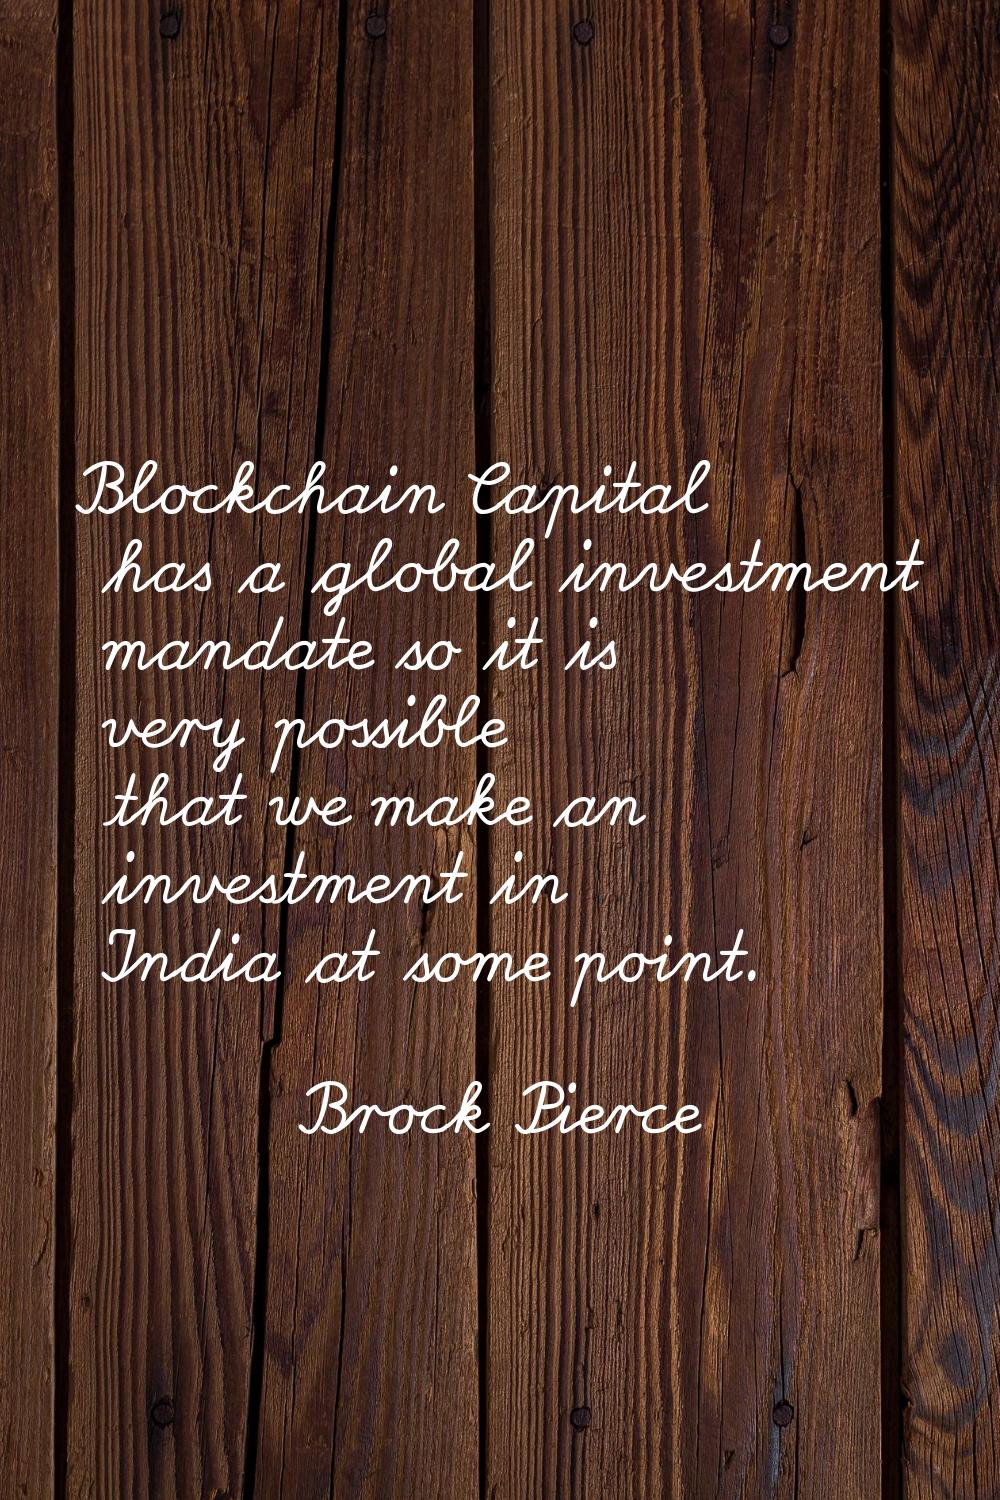 Blockchain Capital has a global investment mandate so it is very possible that we make an investmen